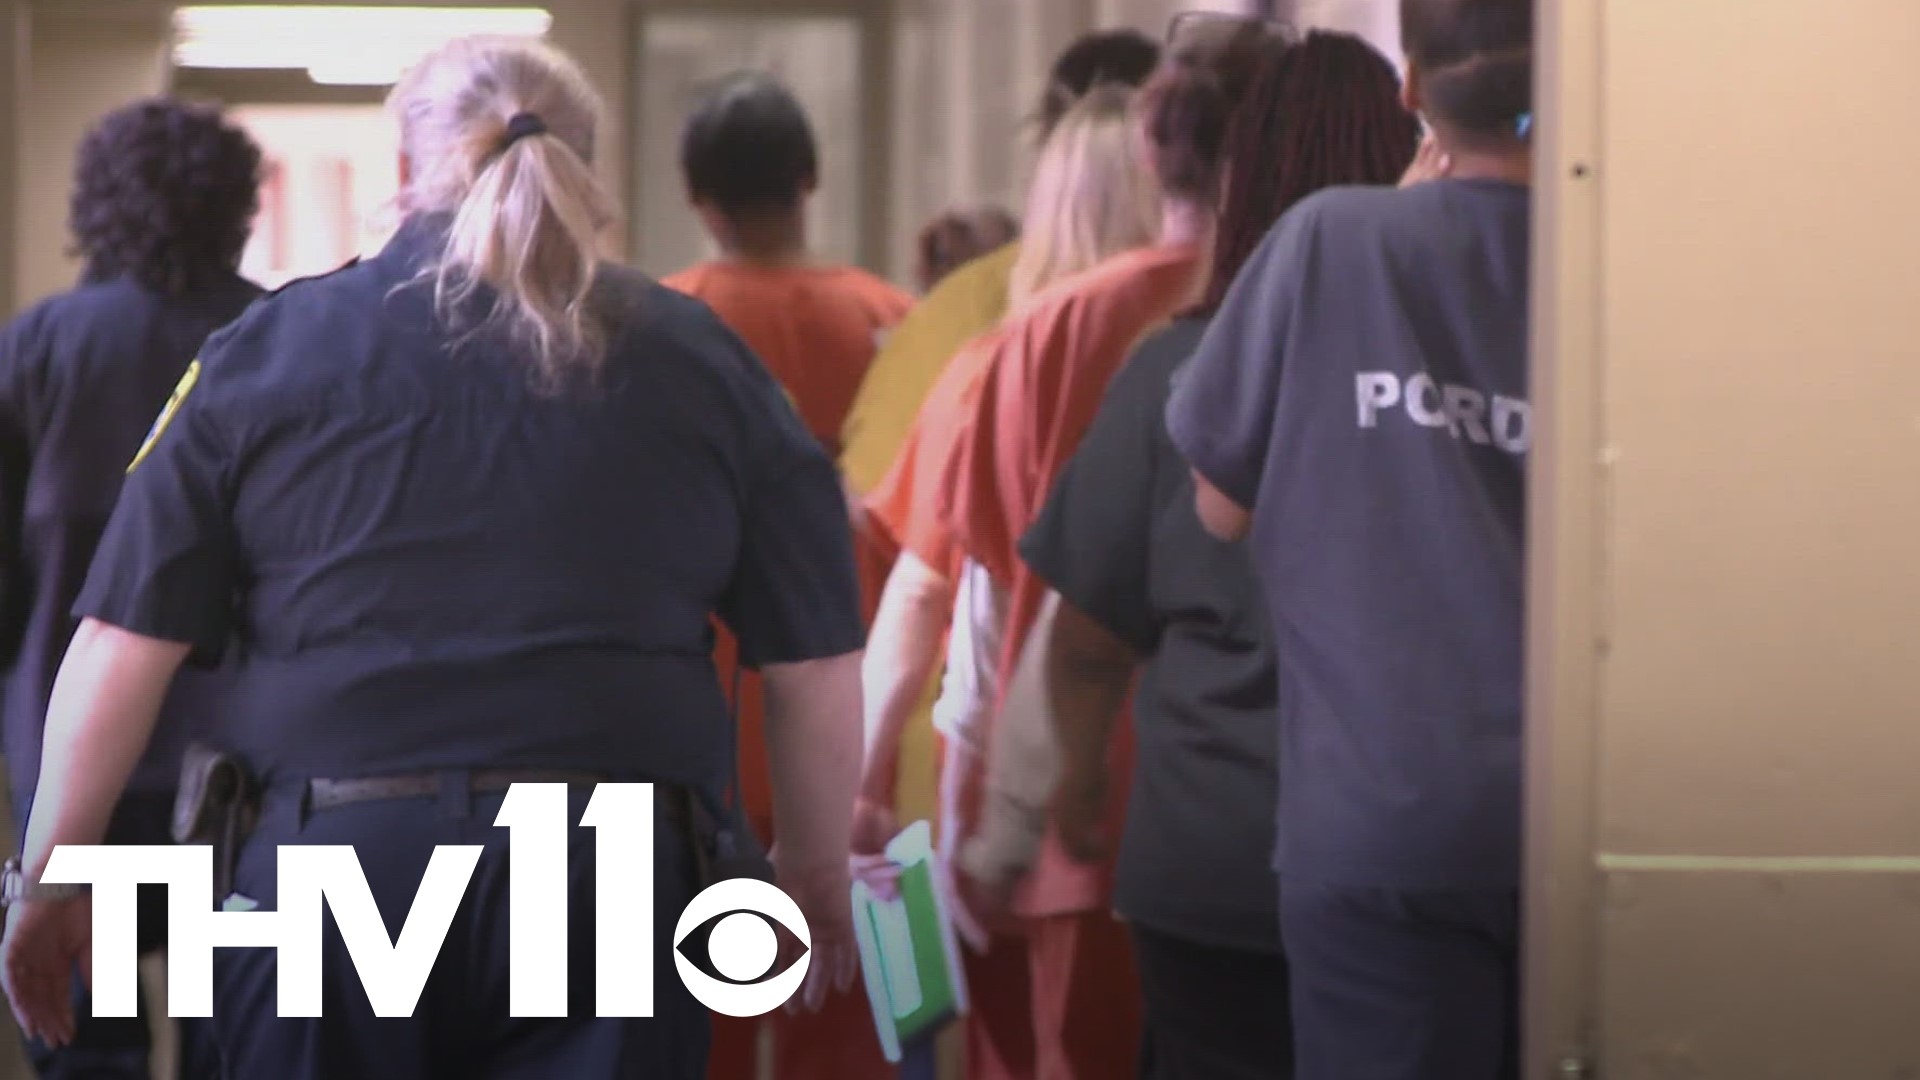 Arkansas Gov. Sarah Huckabee Sanders wants the Board of Corrections to approve 500 additional prison beds to help with overcrowding, but how bad are the issues?